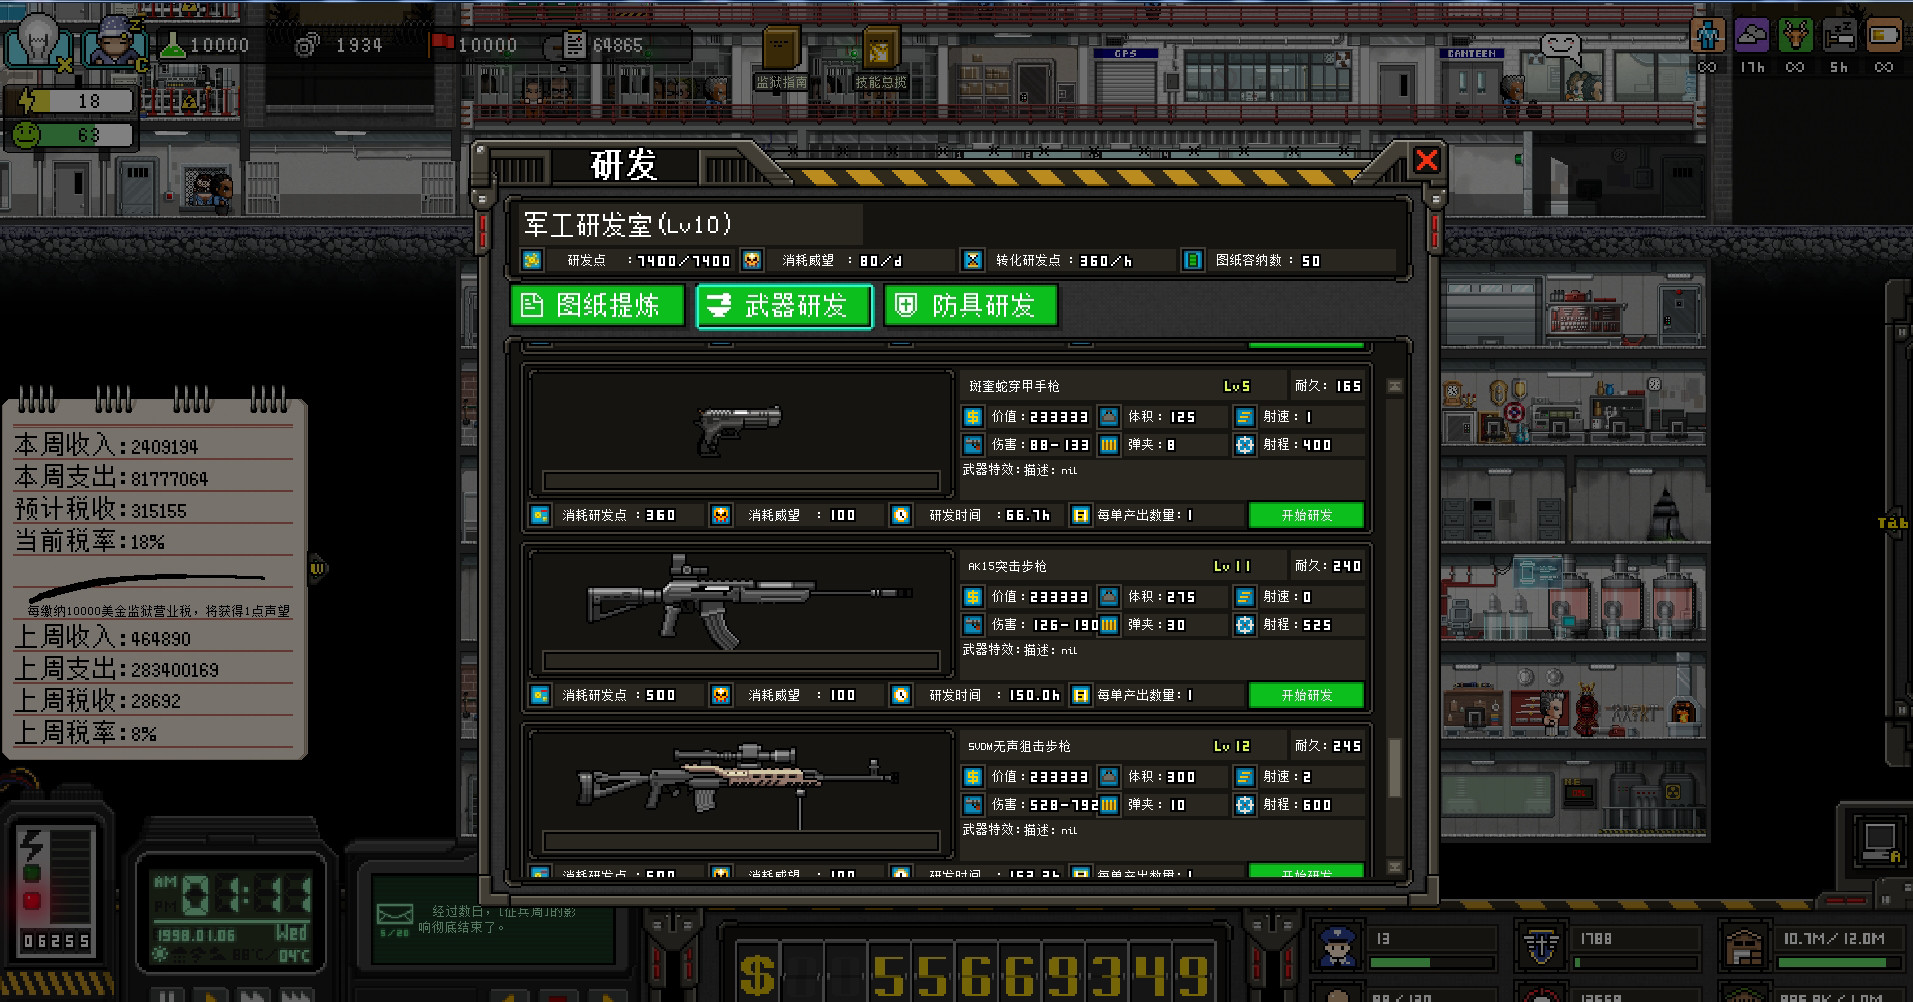 City of God I:Prison Empire-Red Heat-红场特警 Featured Screenshot #1